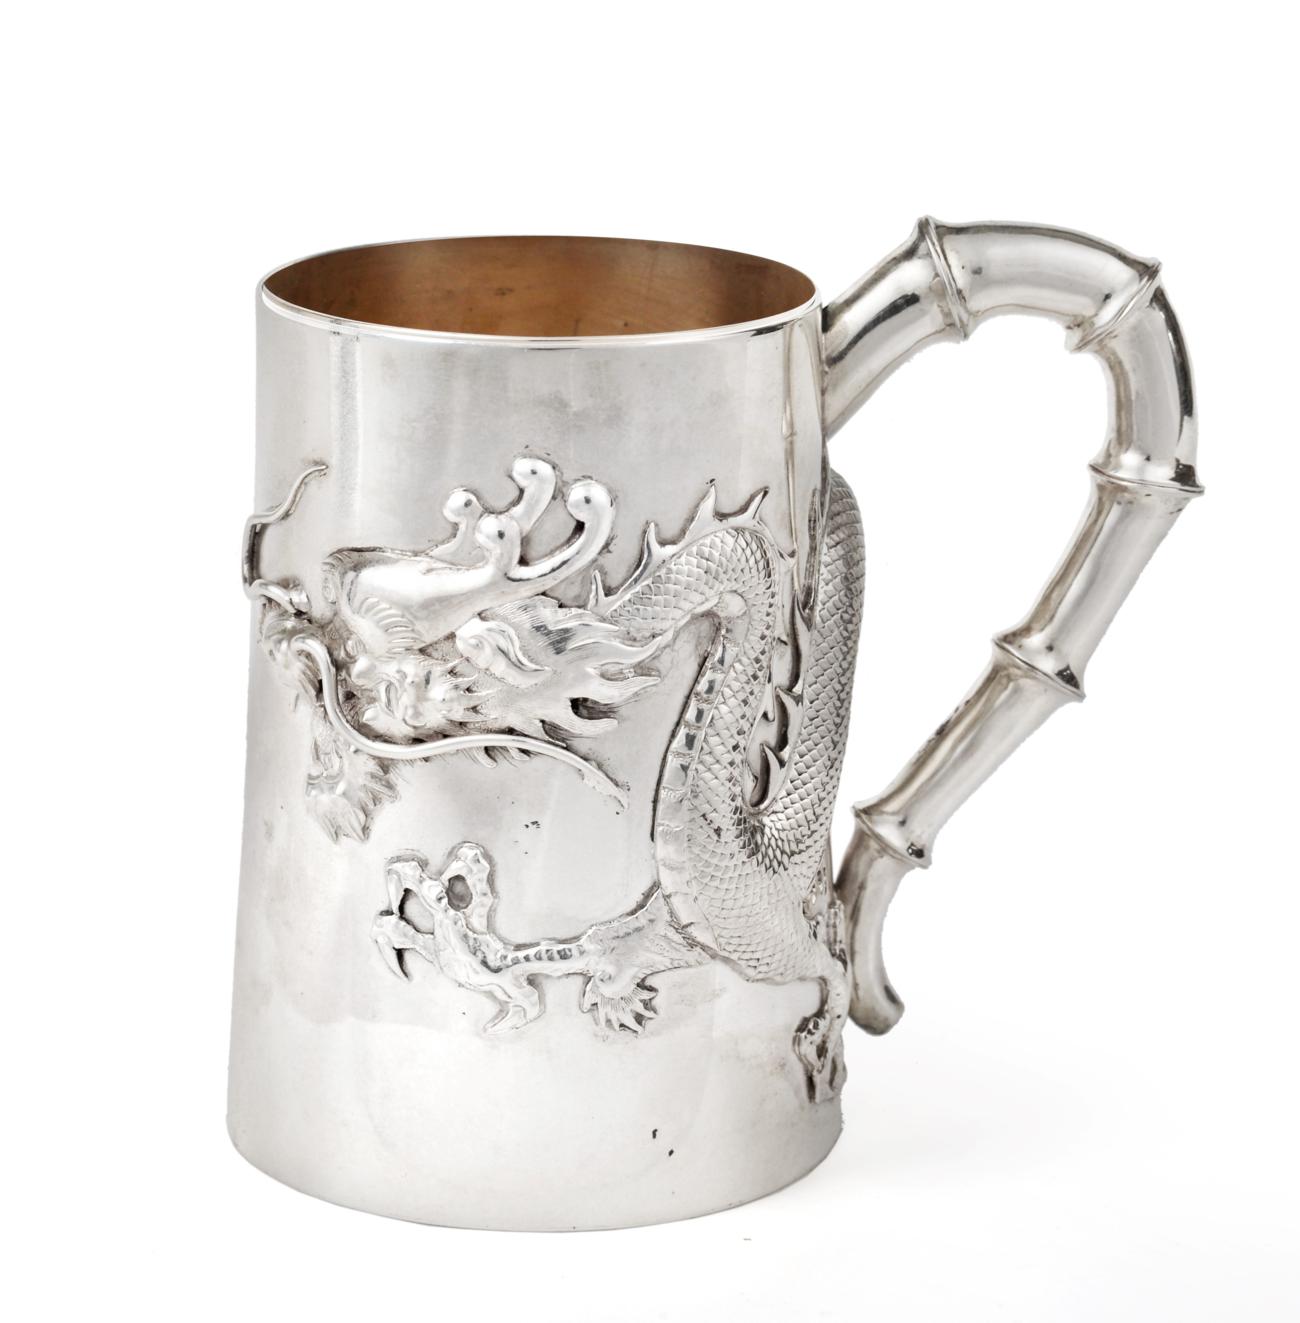 Lot 3102 - A Chinese Export Silver Mug, by Hung Chong, Canton and Shanghai, Late 19th Century, tapering...